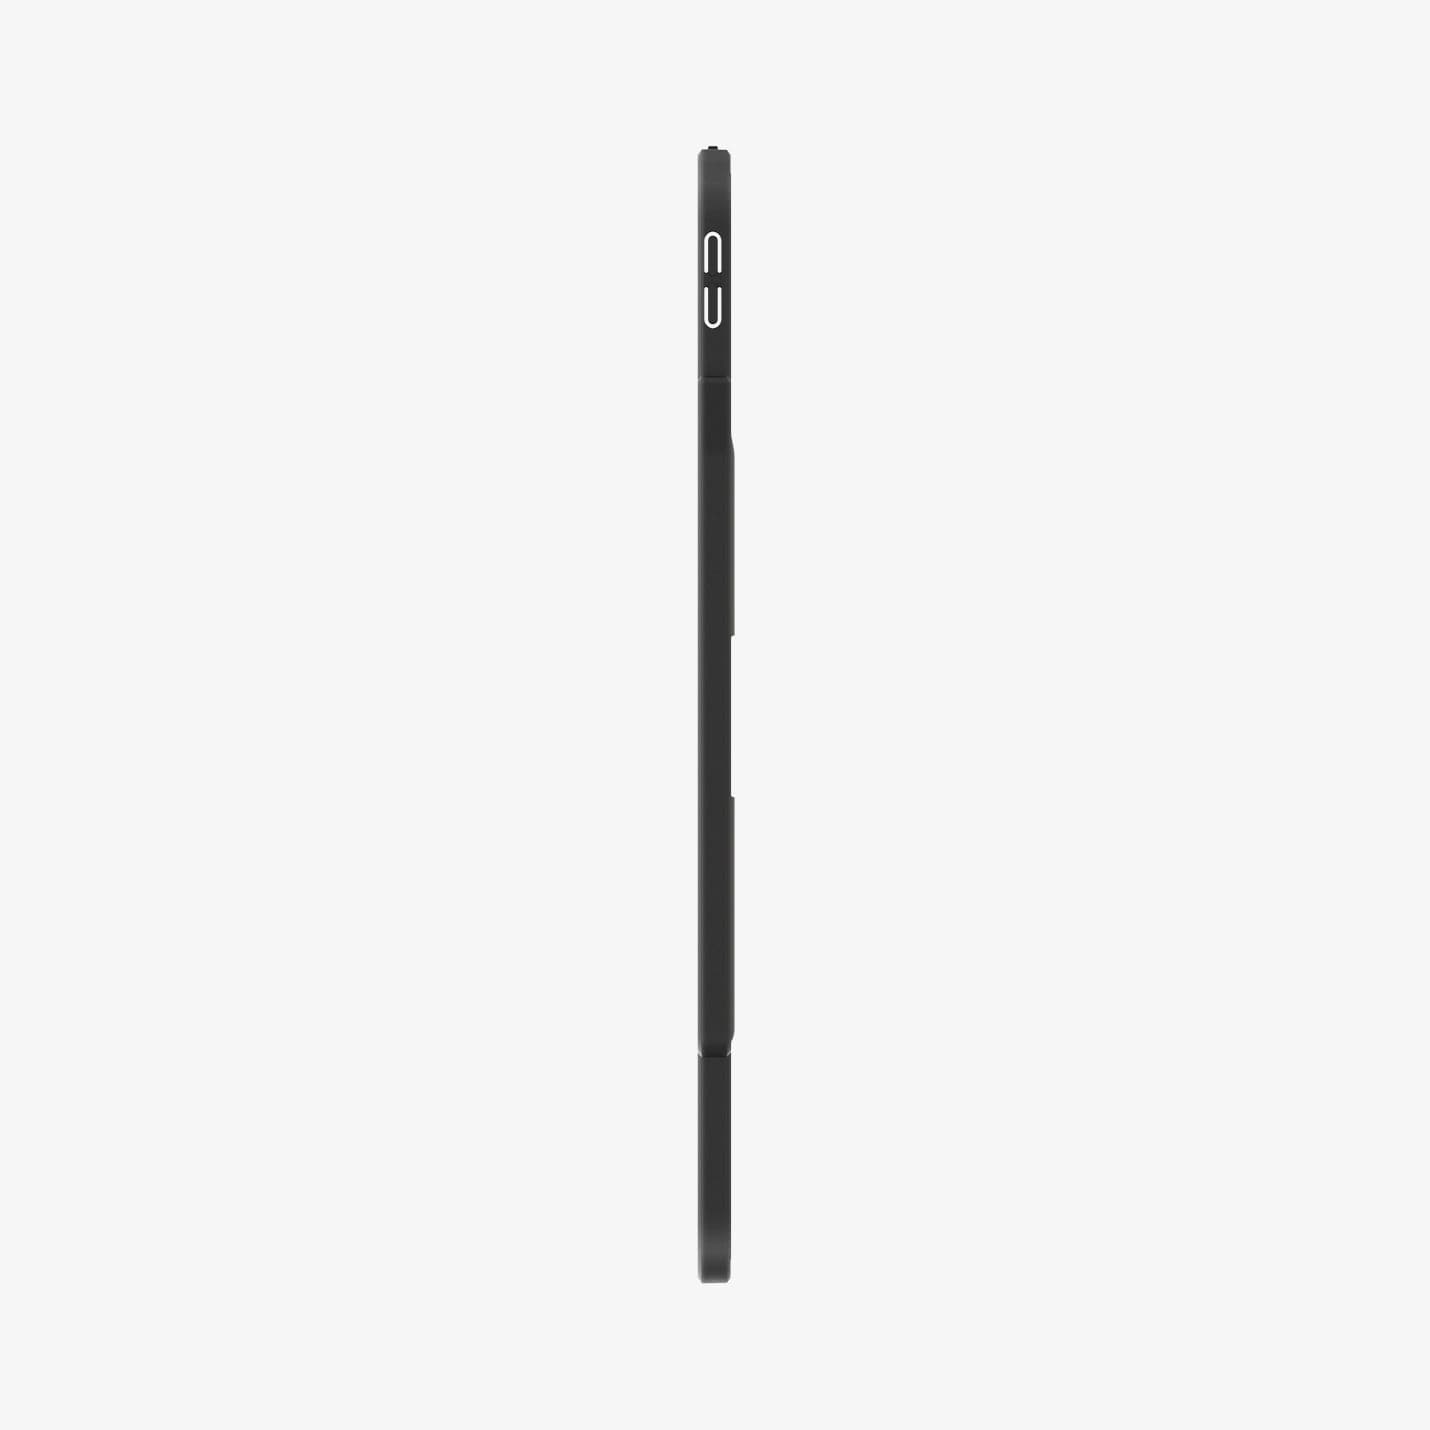 ACS05468 - iPad Pro 12.9" Case Thin Fit Pro in black showing the side